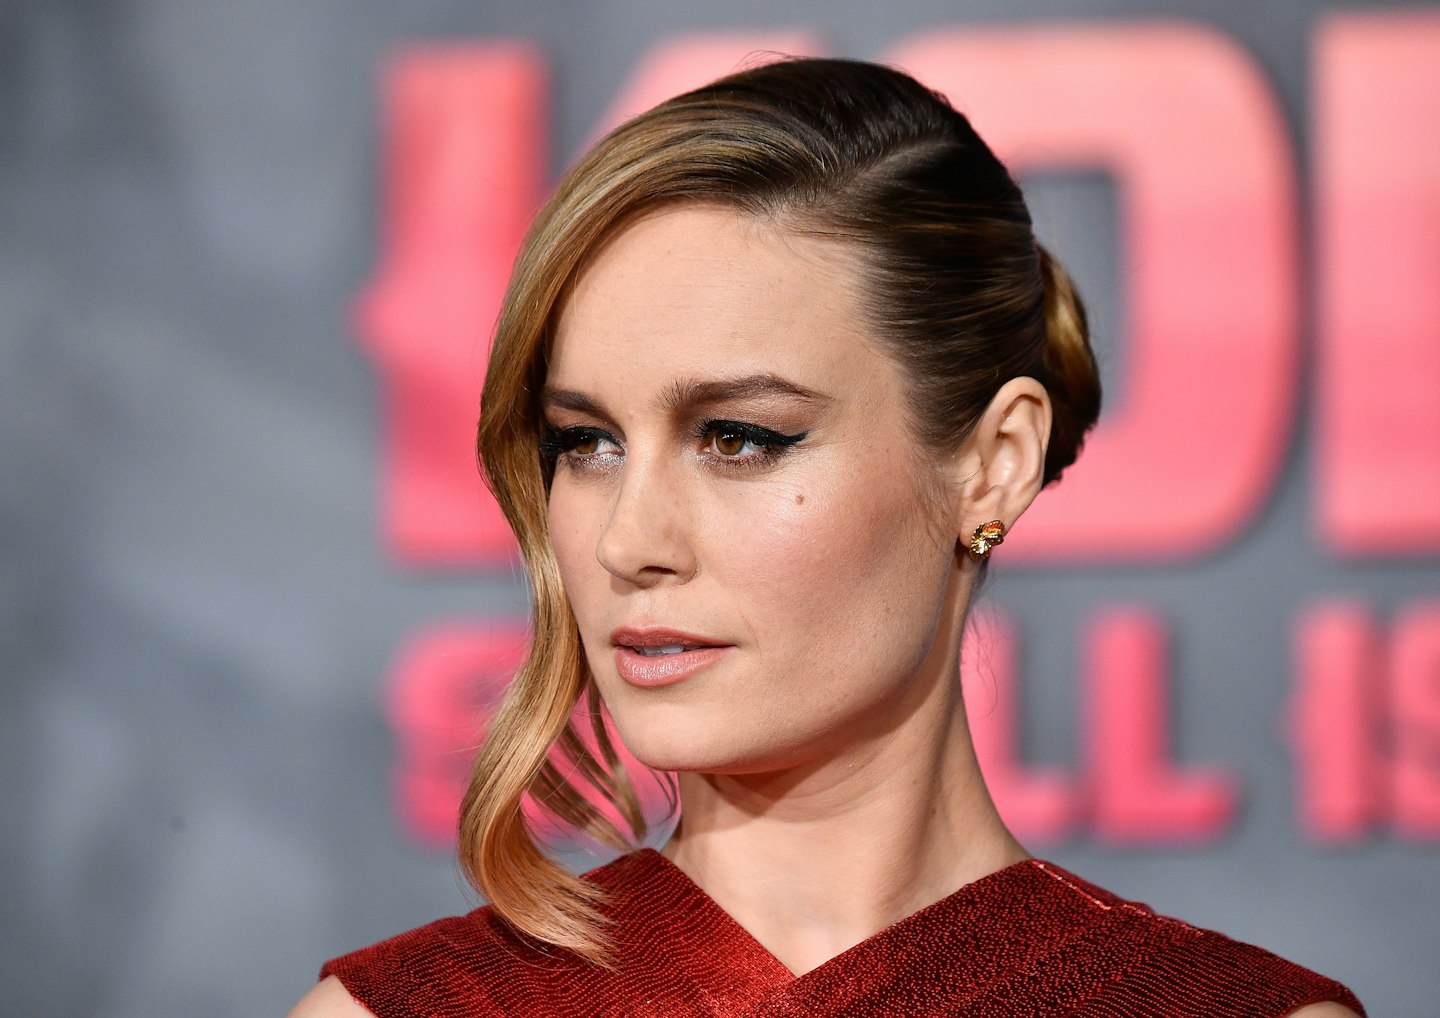 See Brie Larson Hanging Out In A See-Through Top